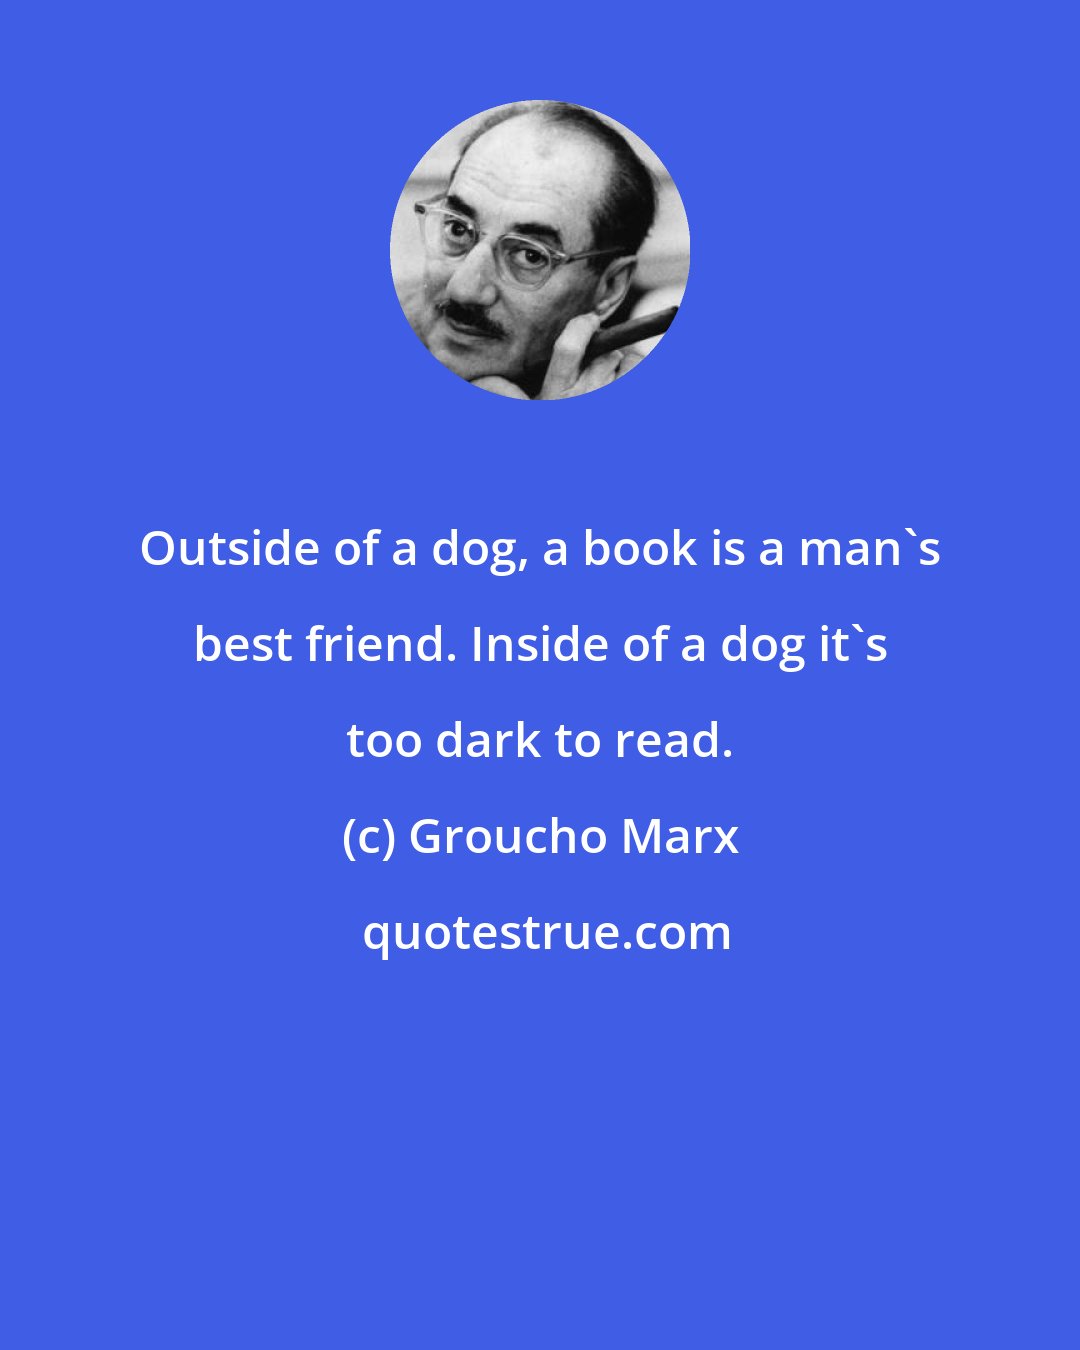 Groucho Marx: Outside of a dog, a book is a man's best friend. Inside of a dog it's too dark to read.